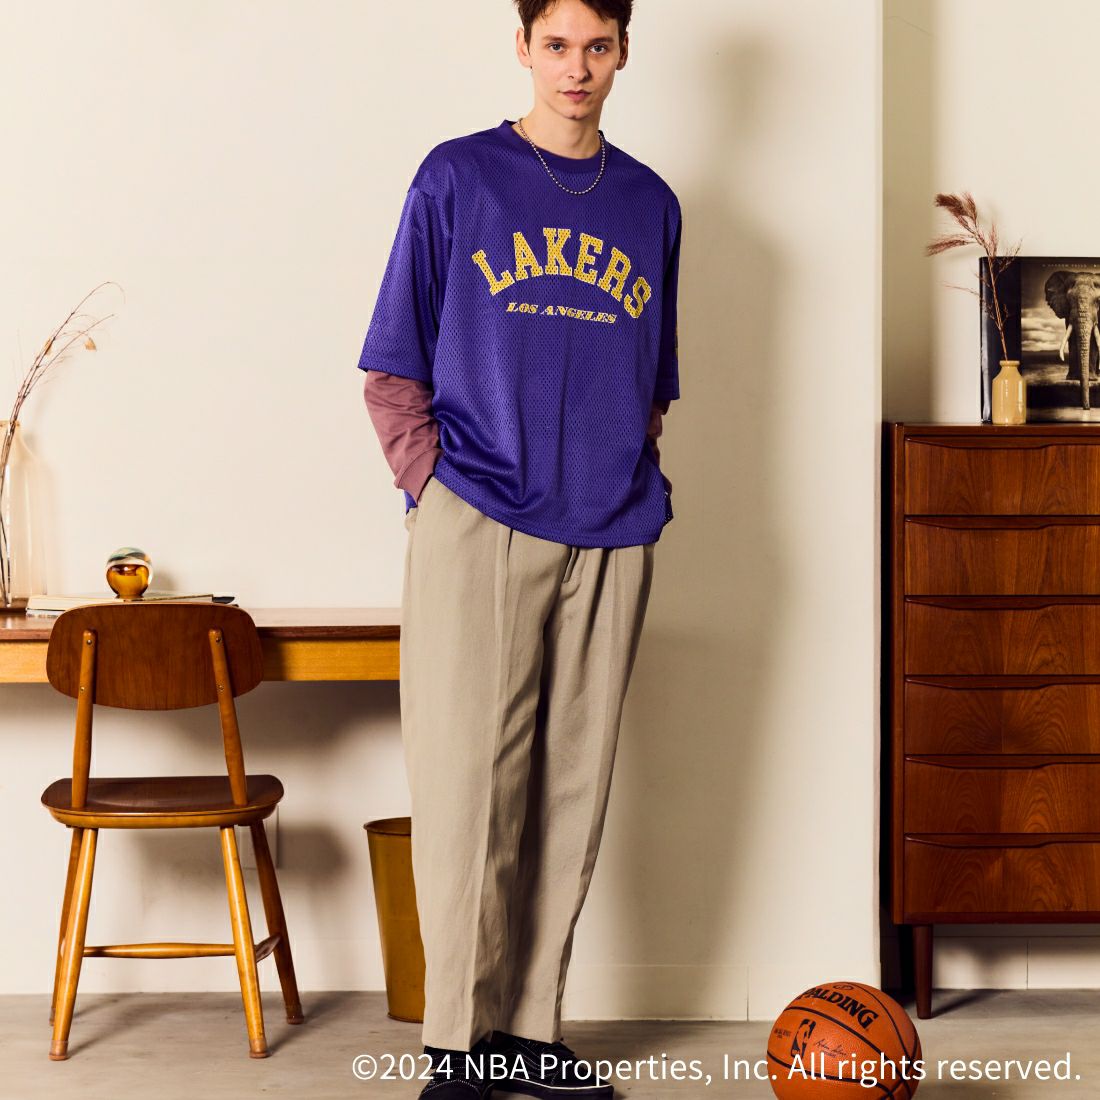 OFF THE COURT BY NBA [オフ ザ コート バイ エヌビーエー] 別注 メッシュTシャツ [JF-24SS-001-JF] PPL LAKERS